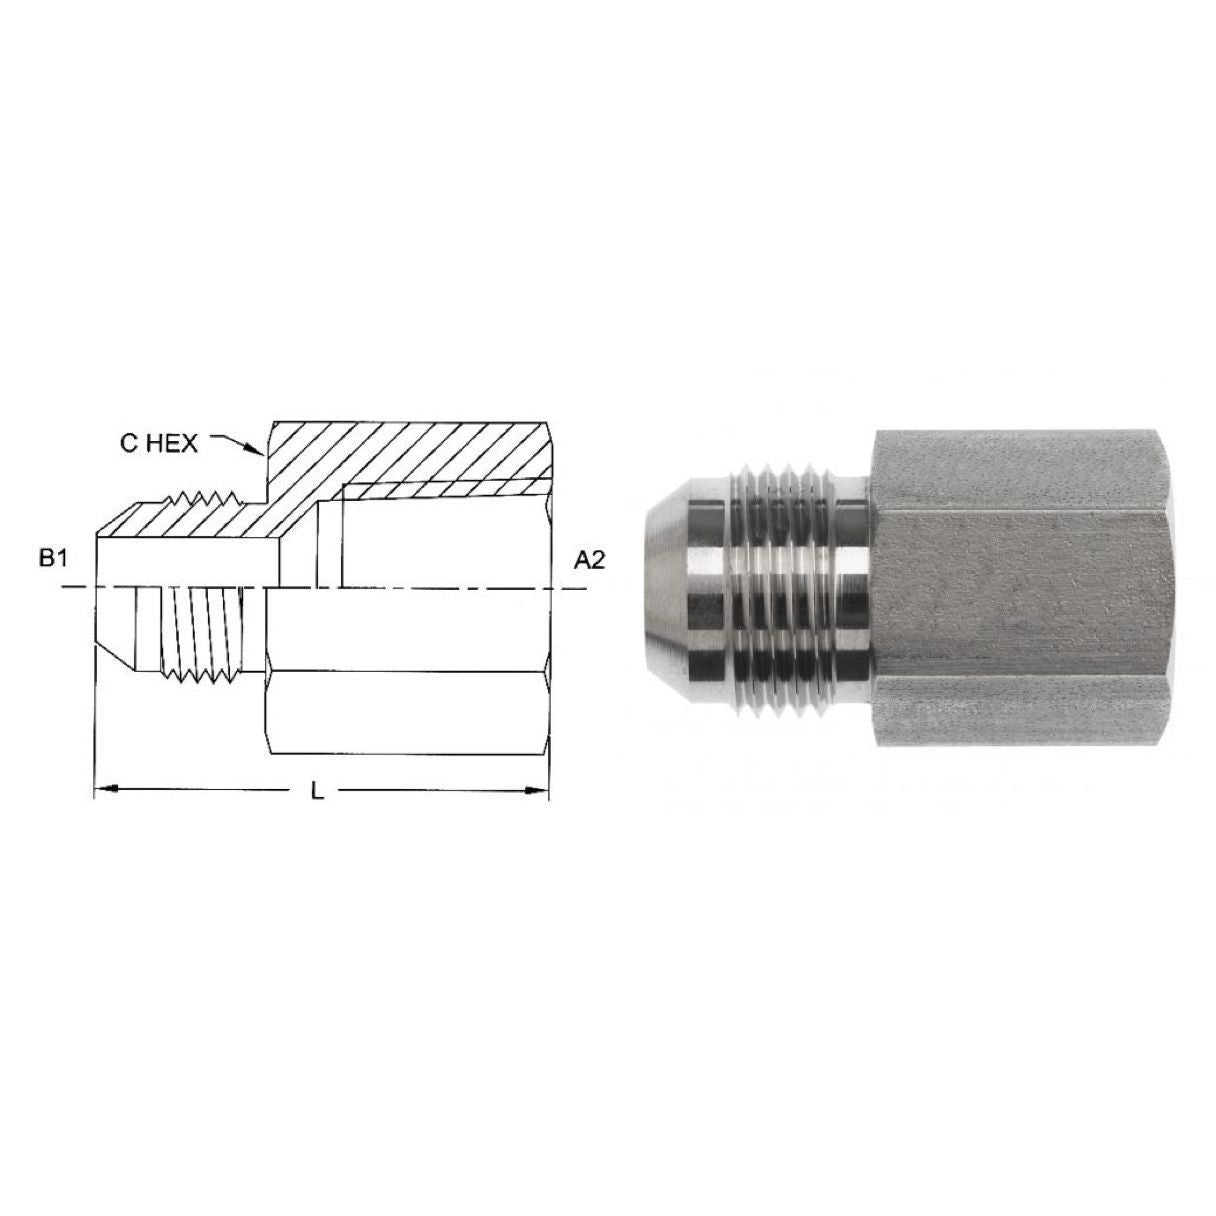 2405-16-20 : OneHydraulics  Adapter, Straight, 1" Male NPT x 1.25 (1-1/4") Female, Steel, 2500psi